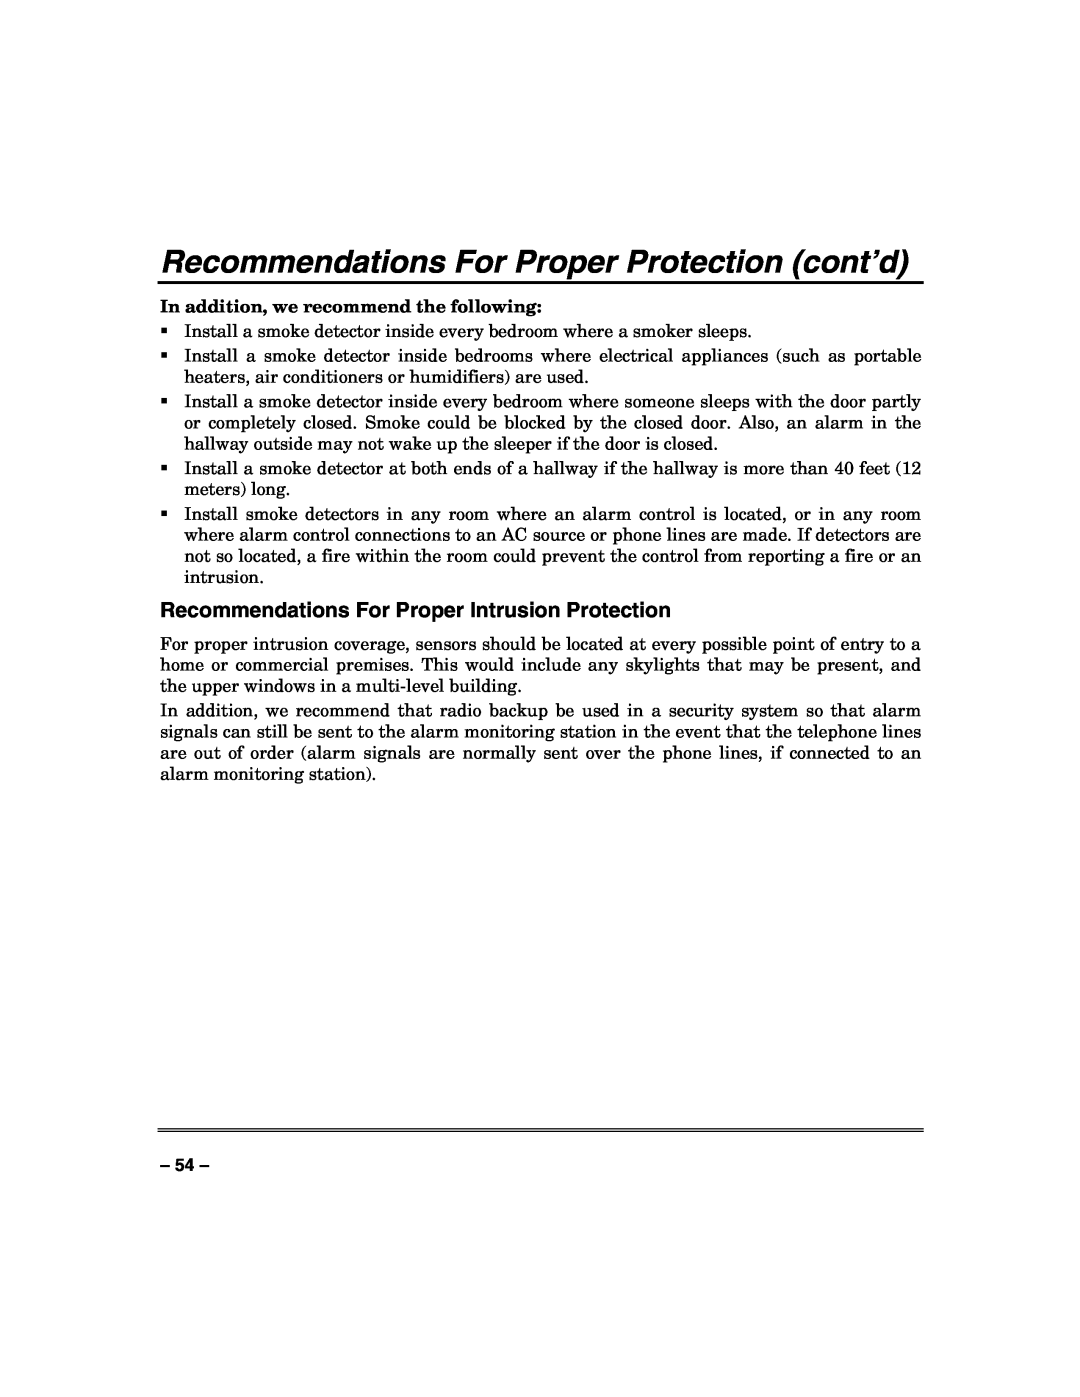 Honeywell VISTA-50PUL manual Recommendations For Proper Protection cont’d, Recommendations For Proper Intrusion Protection 